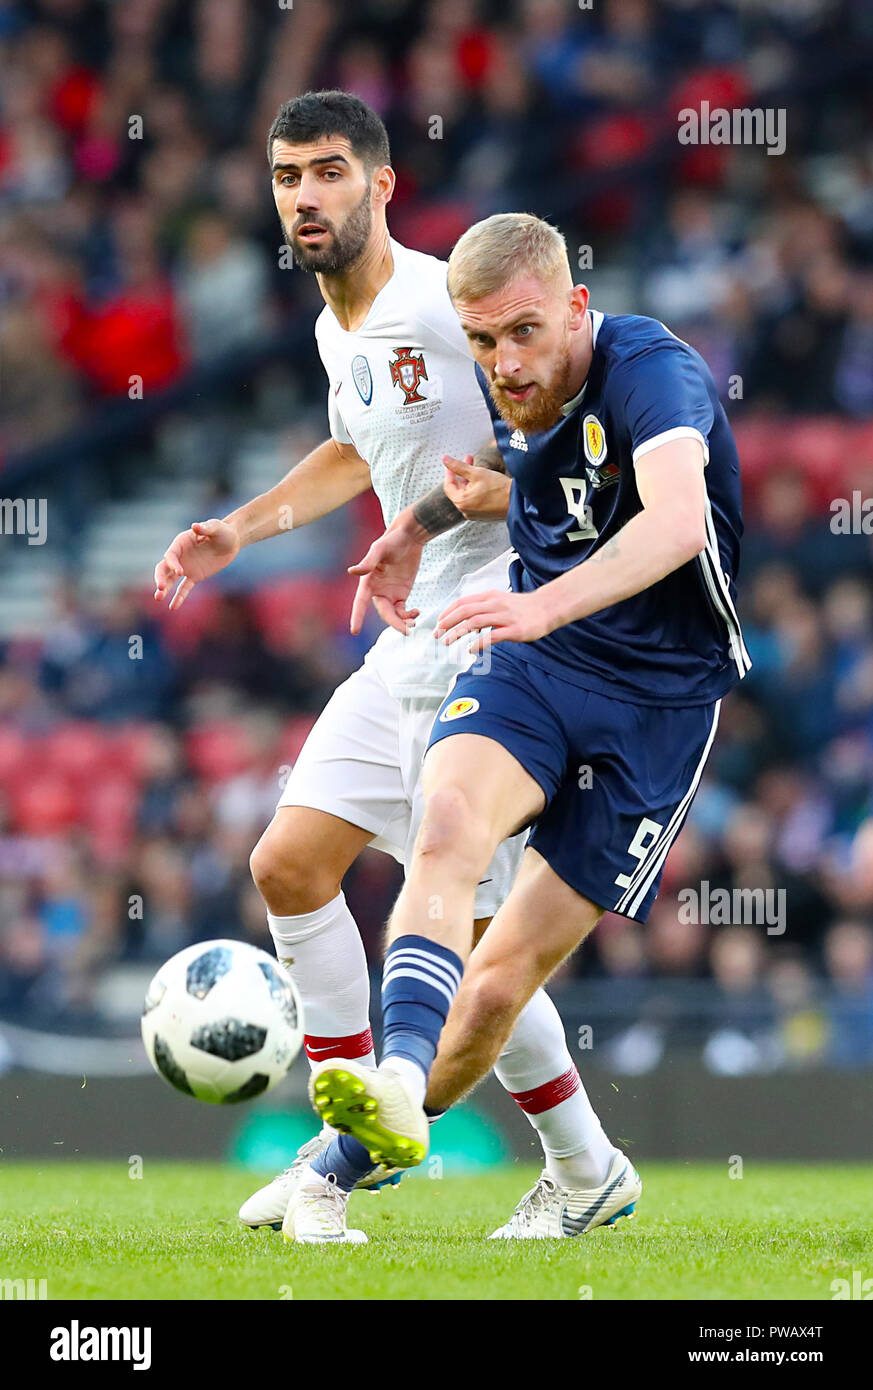 Portugal's Luis Neto (left) and Scotland's Scott McKenna battle for the ball during the International Friendly match at Hampden Park, Glasgow. Stock Photo